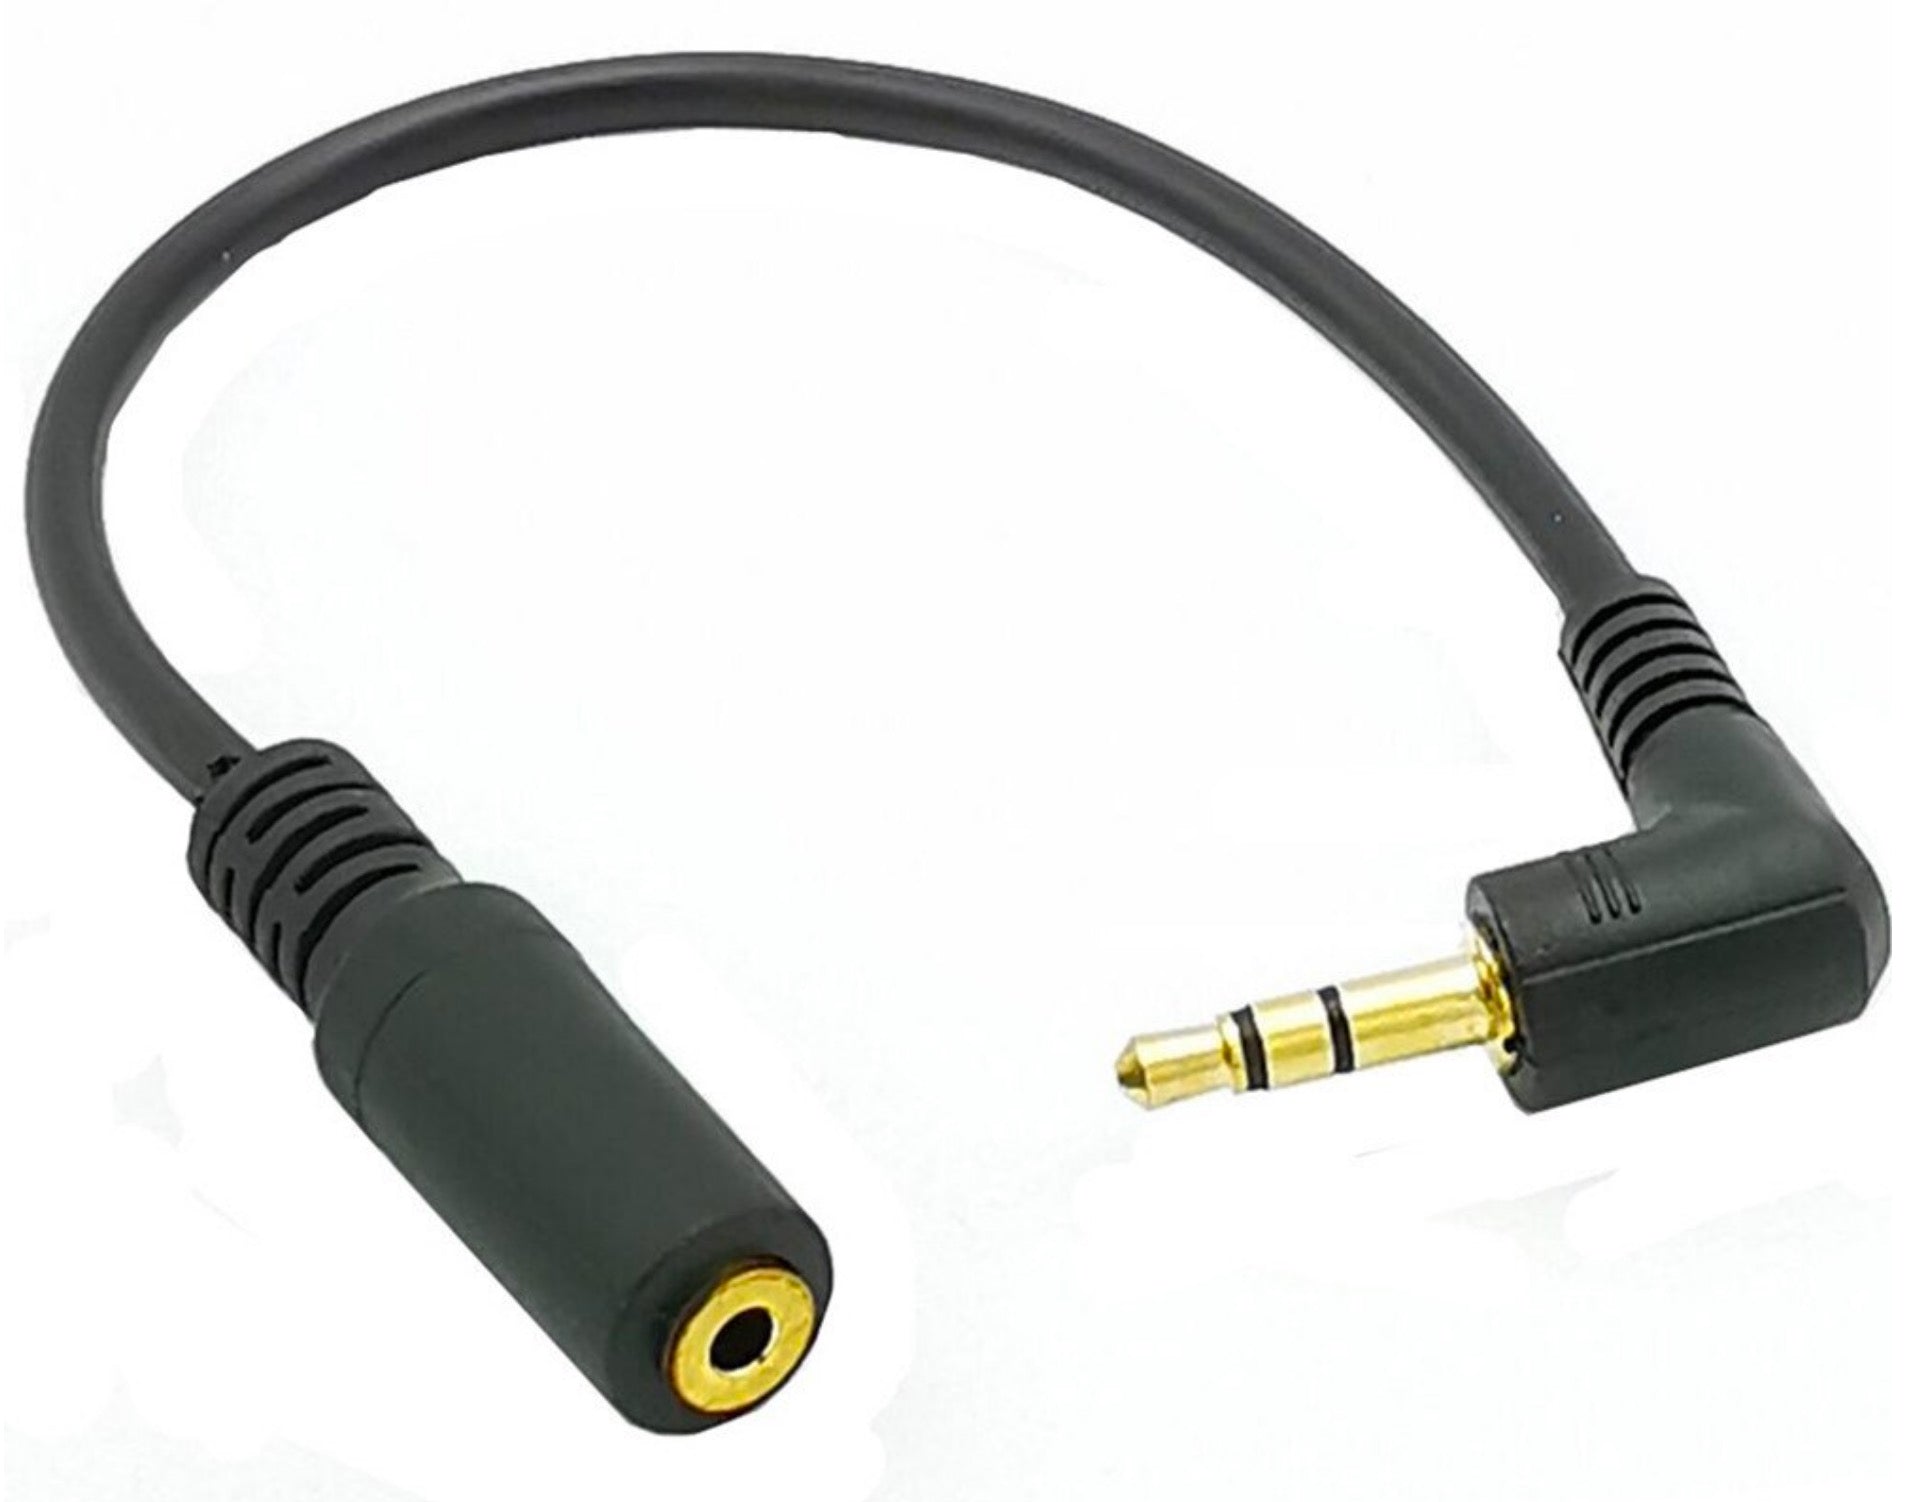 3.5mm 3 Pole Male to 2.5mm 3 Pole Female Stereo Audio Adapter Cable 0.2m